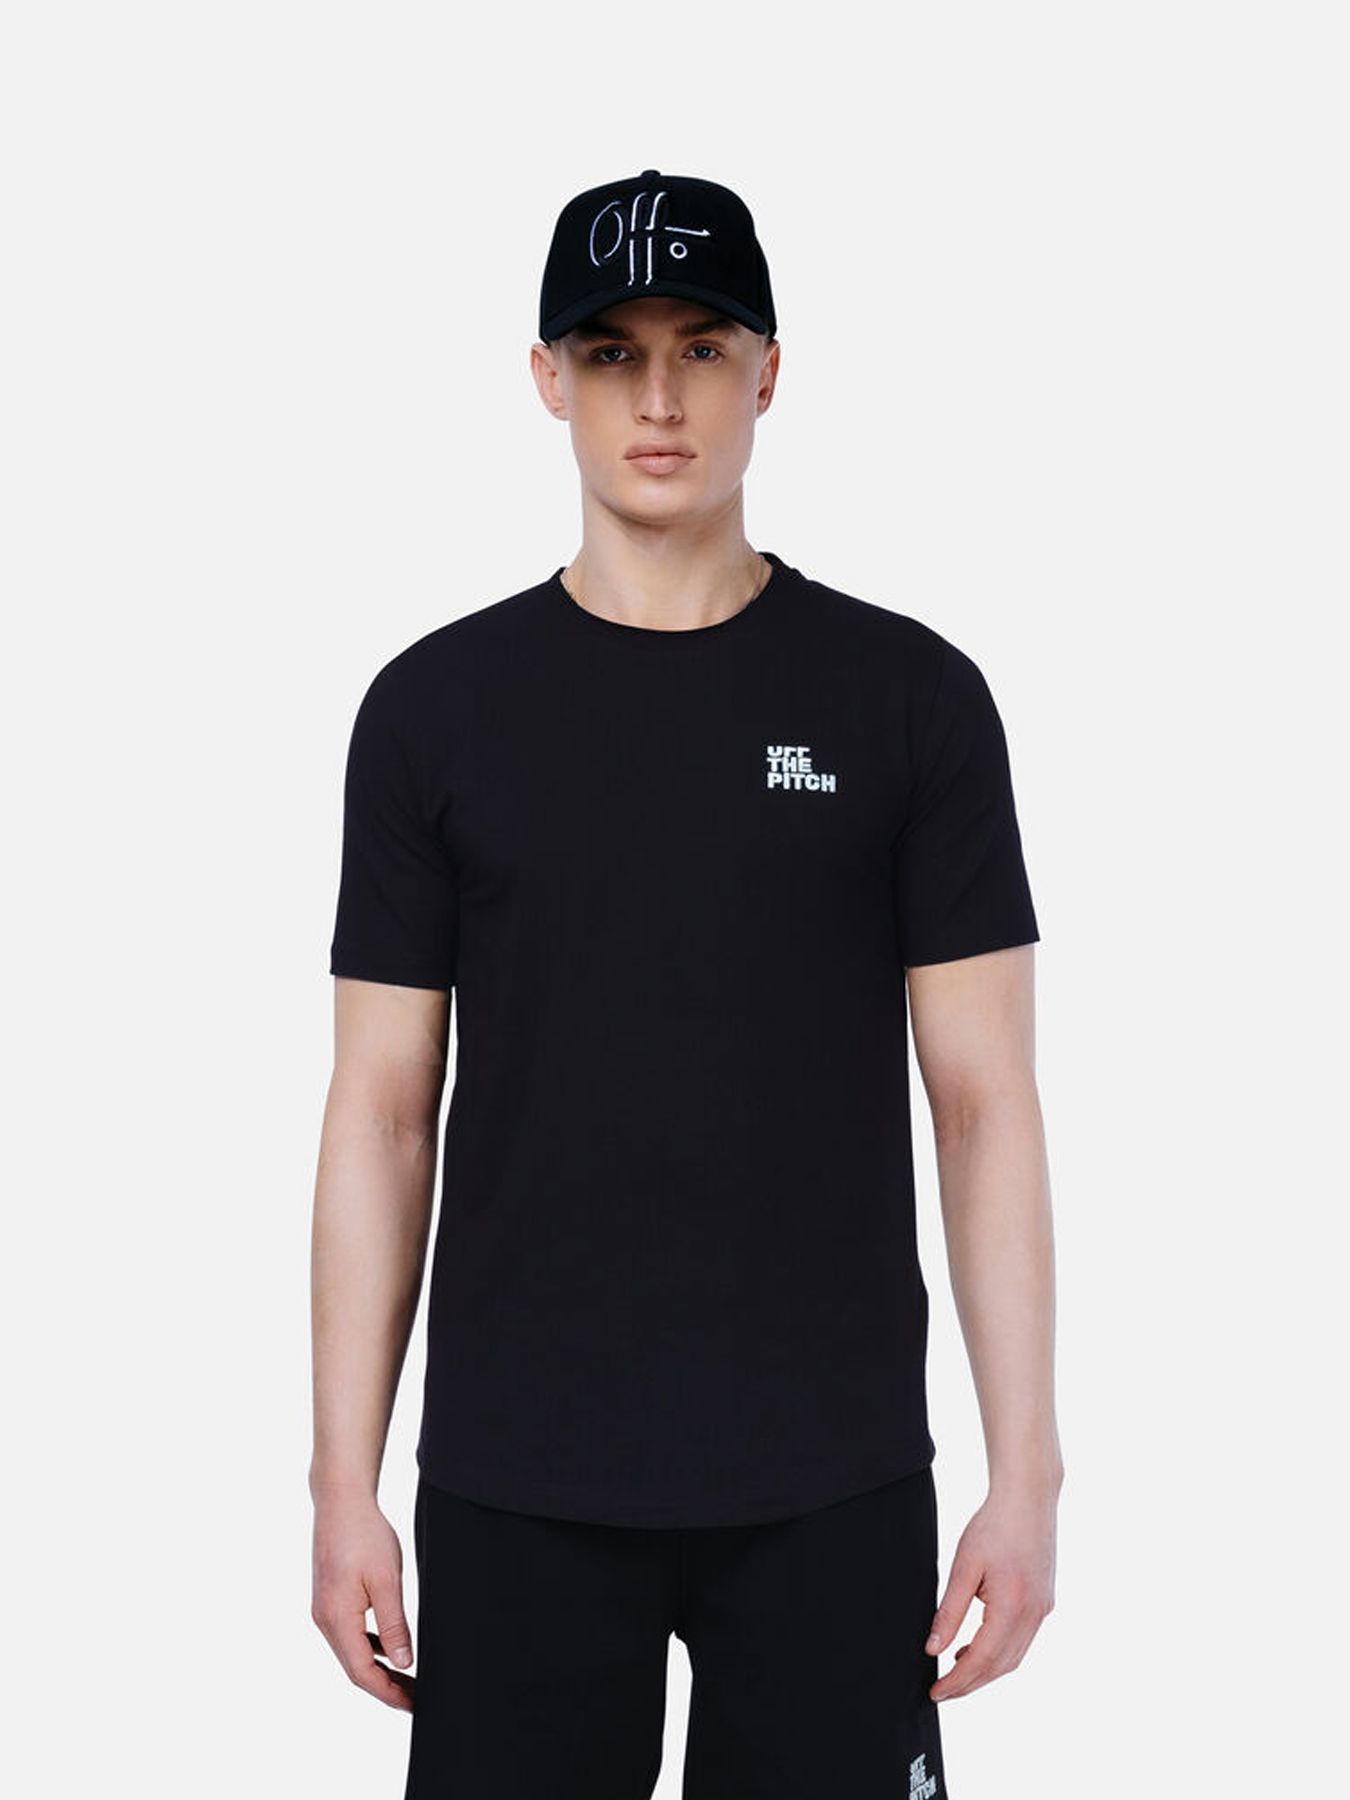 Off The Pitch Fullstop slim fit tee Black 2900148086073